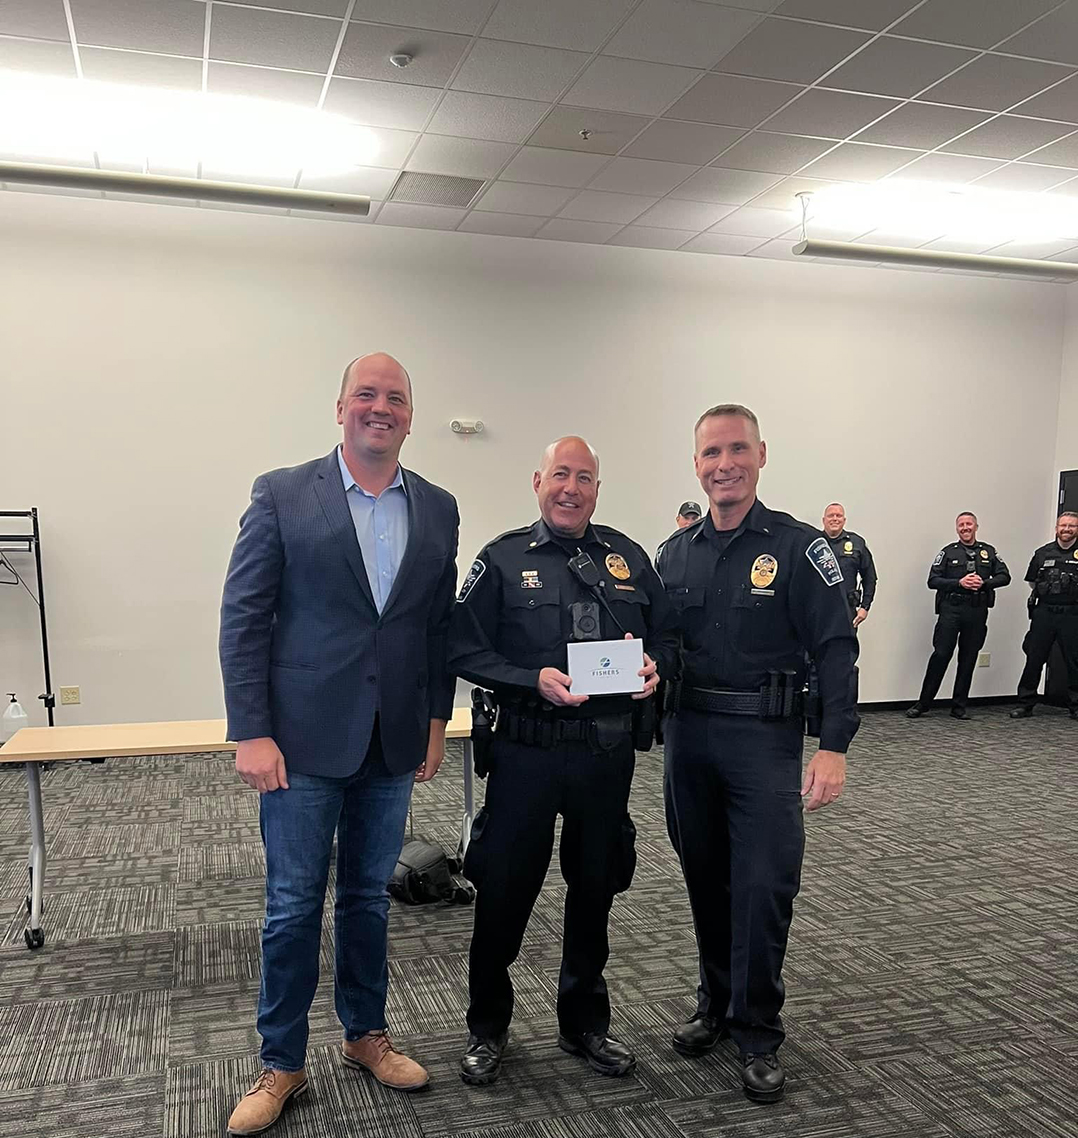 Fishers police officer honored for 20 years of service